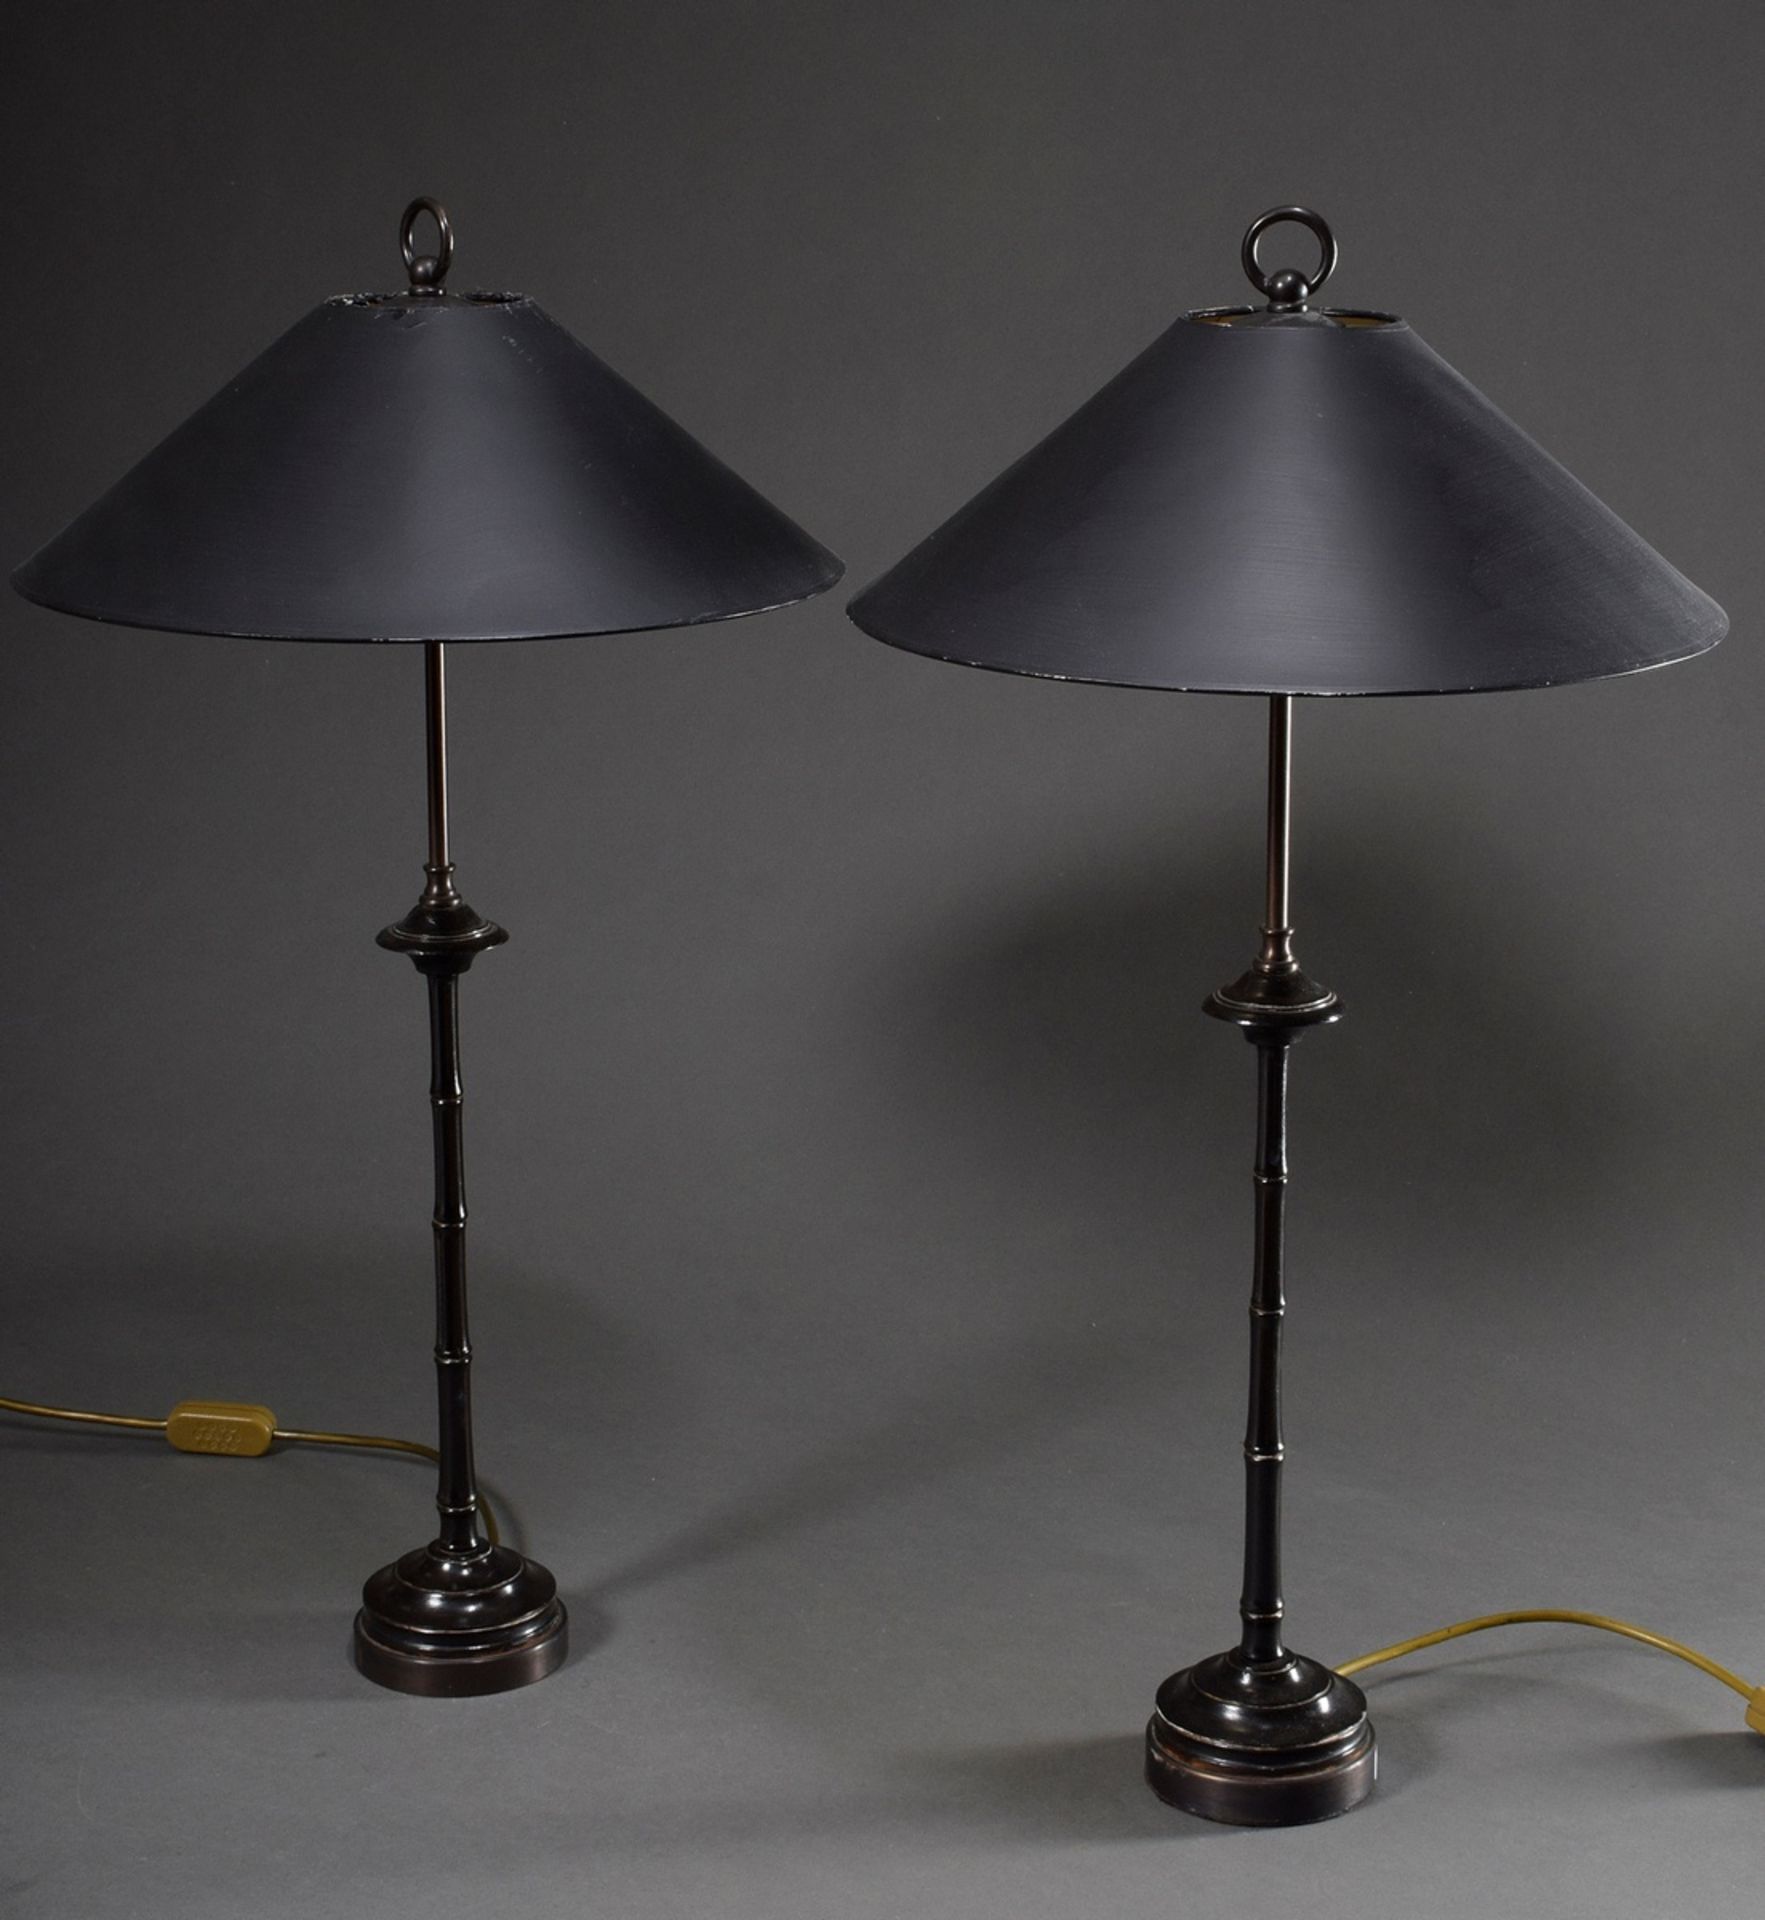 Pair of black modern "Bamboo" table lamps, h. 75cm, 1 lampshade defective - Image 2 of 5